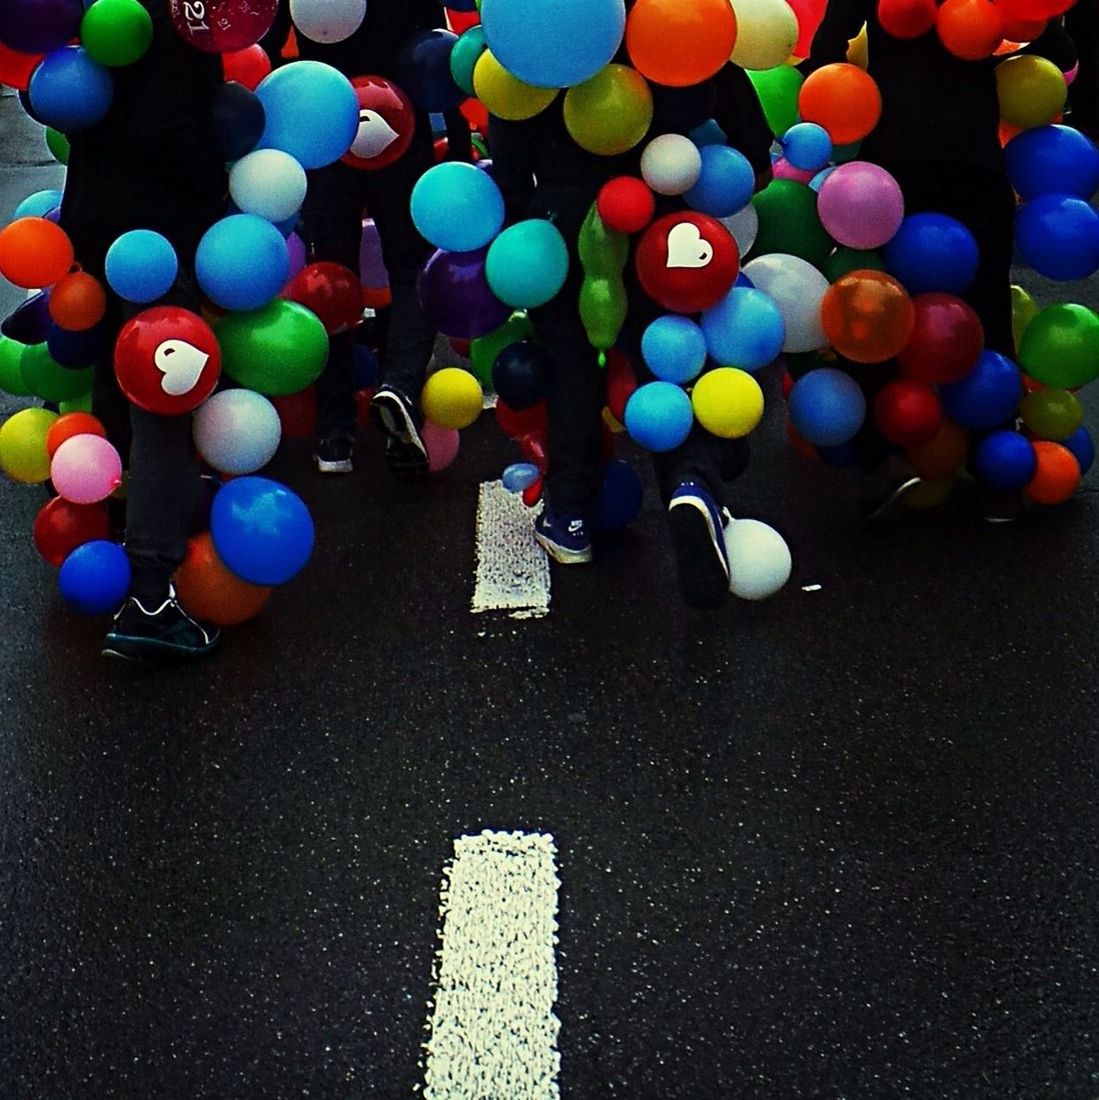 Rear view of people with colorful balloons on road